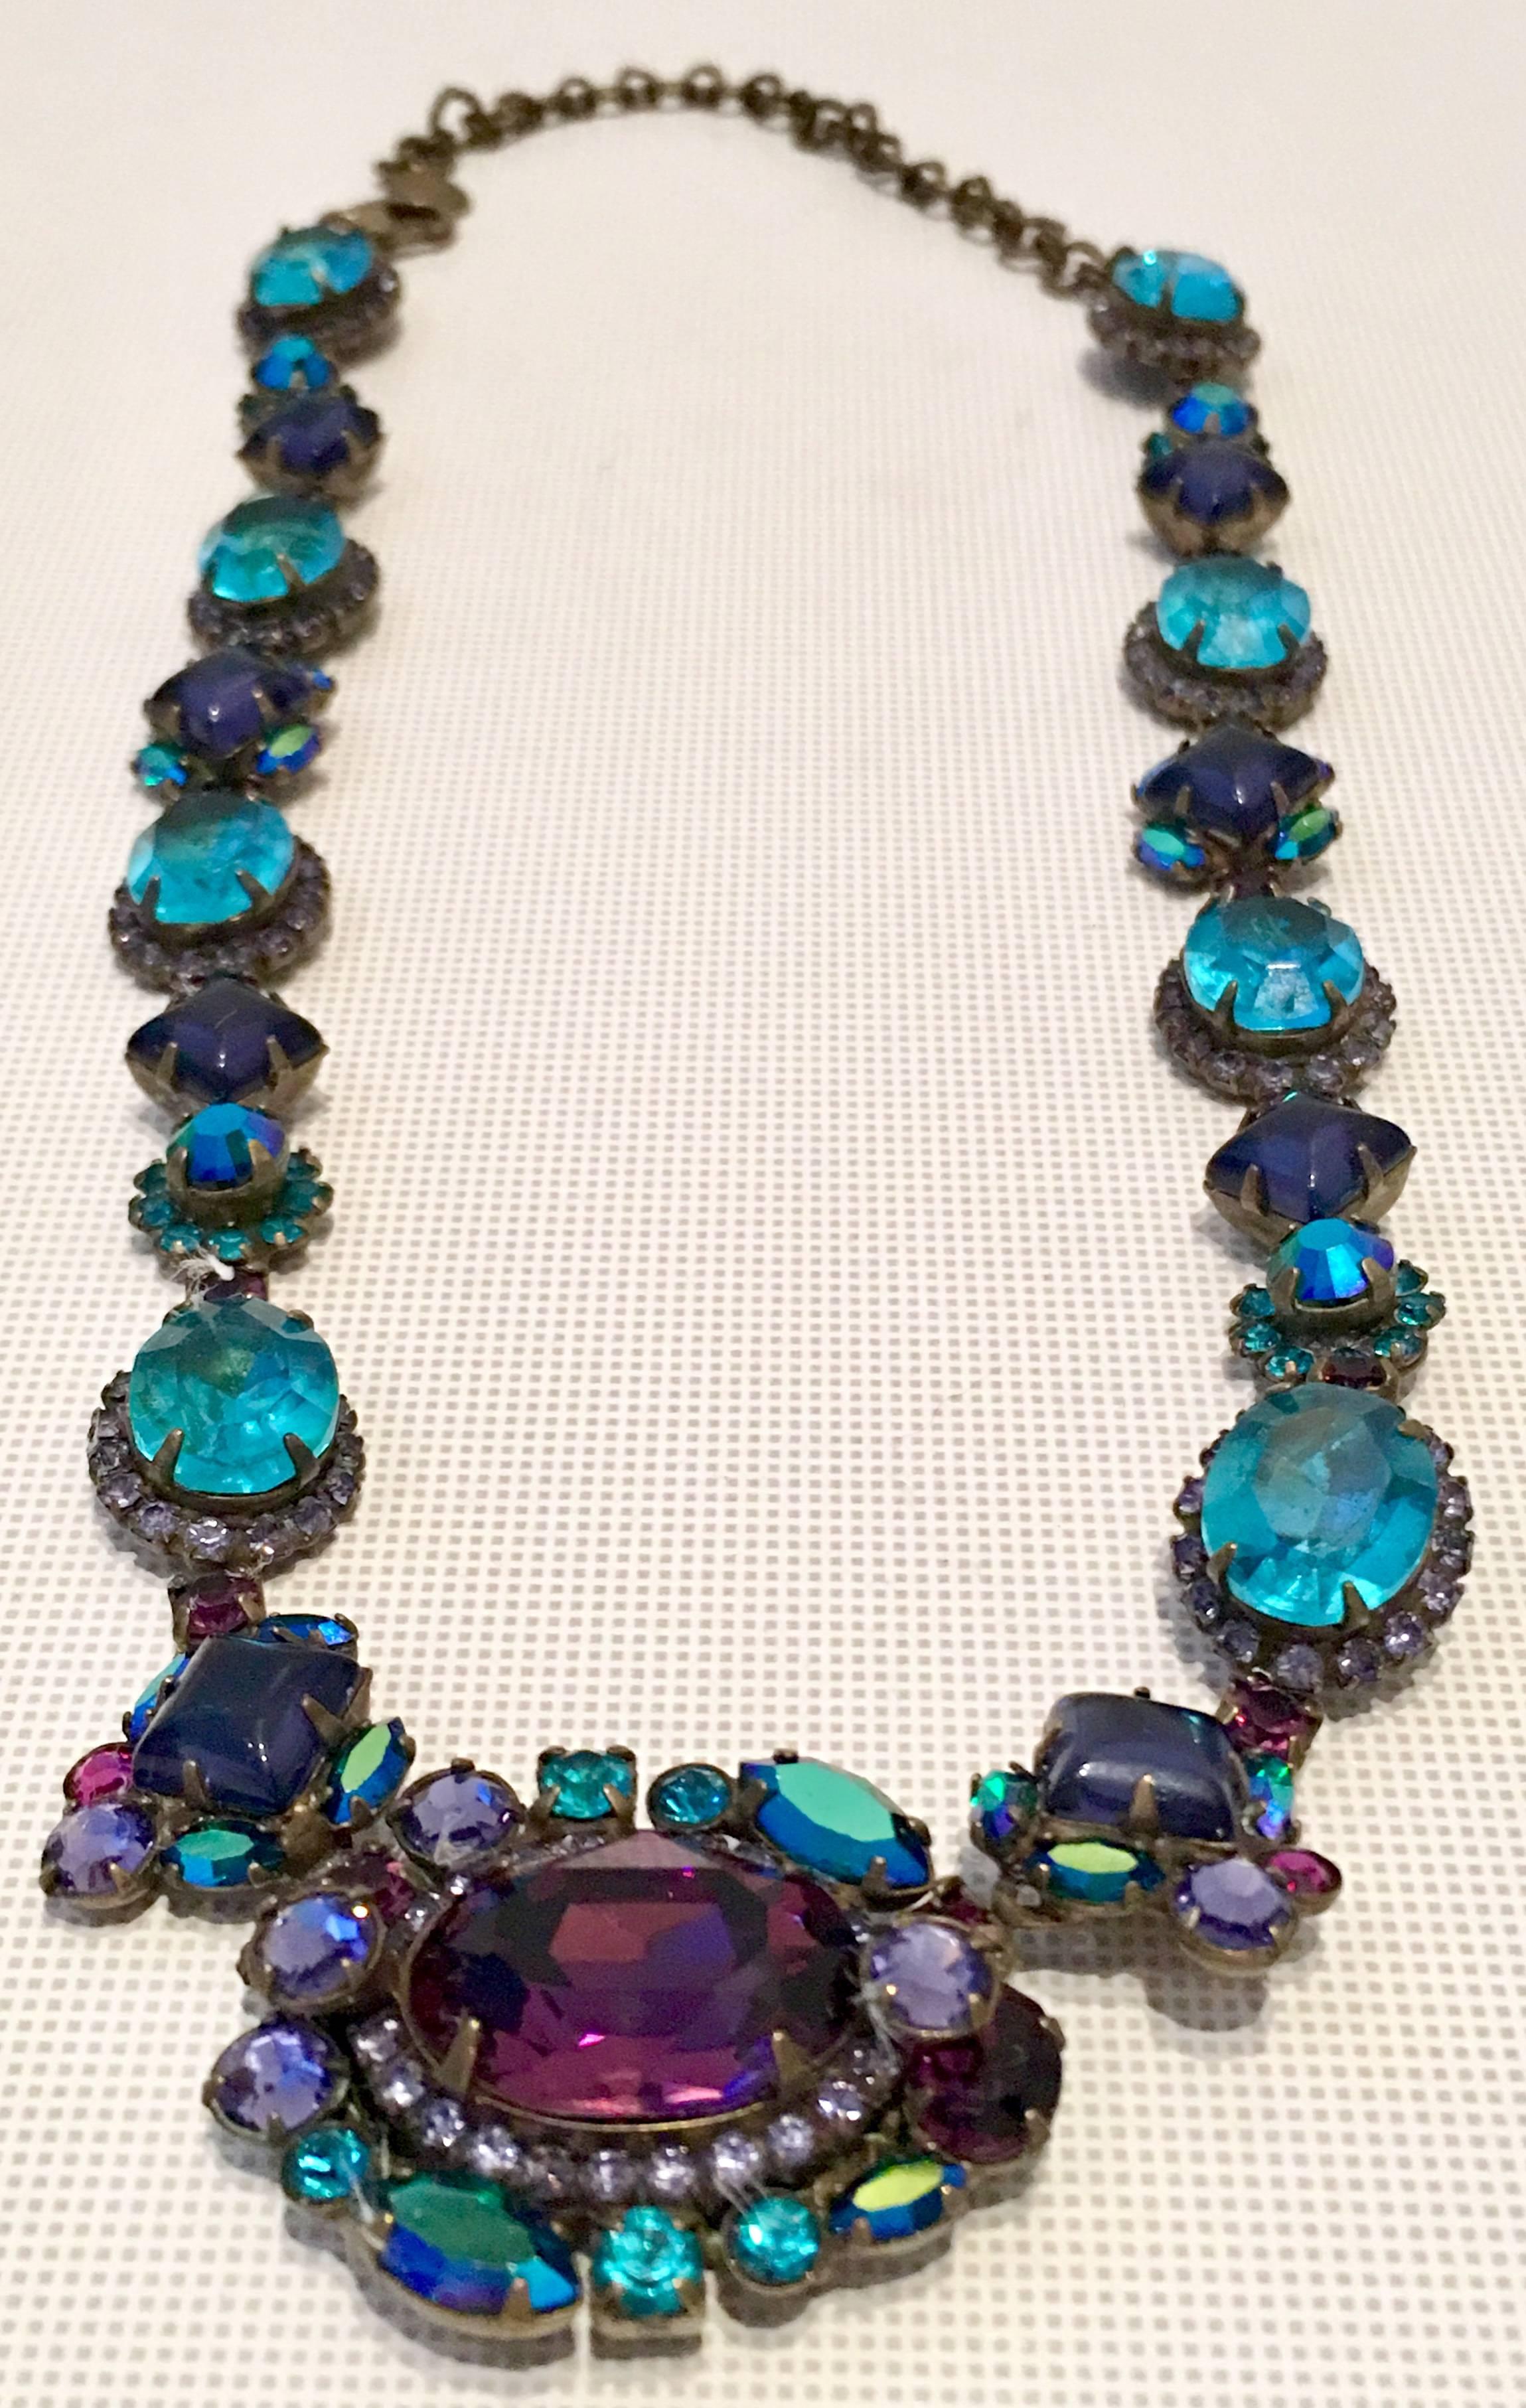  Contemporary Antique Bronze hand crafted prong set Swarovski Crystal Choker Style Necklace By, Sorrelli. Features, Amethyst, blue topaz and aurora borealis colored stones to name a few with abstract floral motif. This 